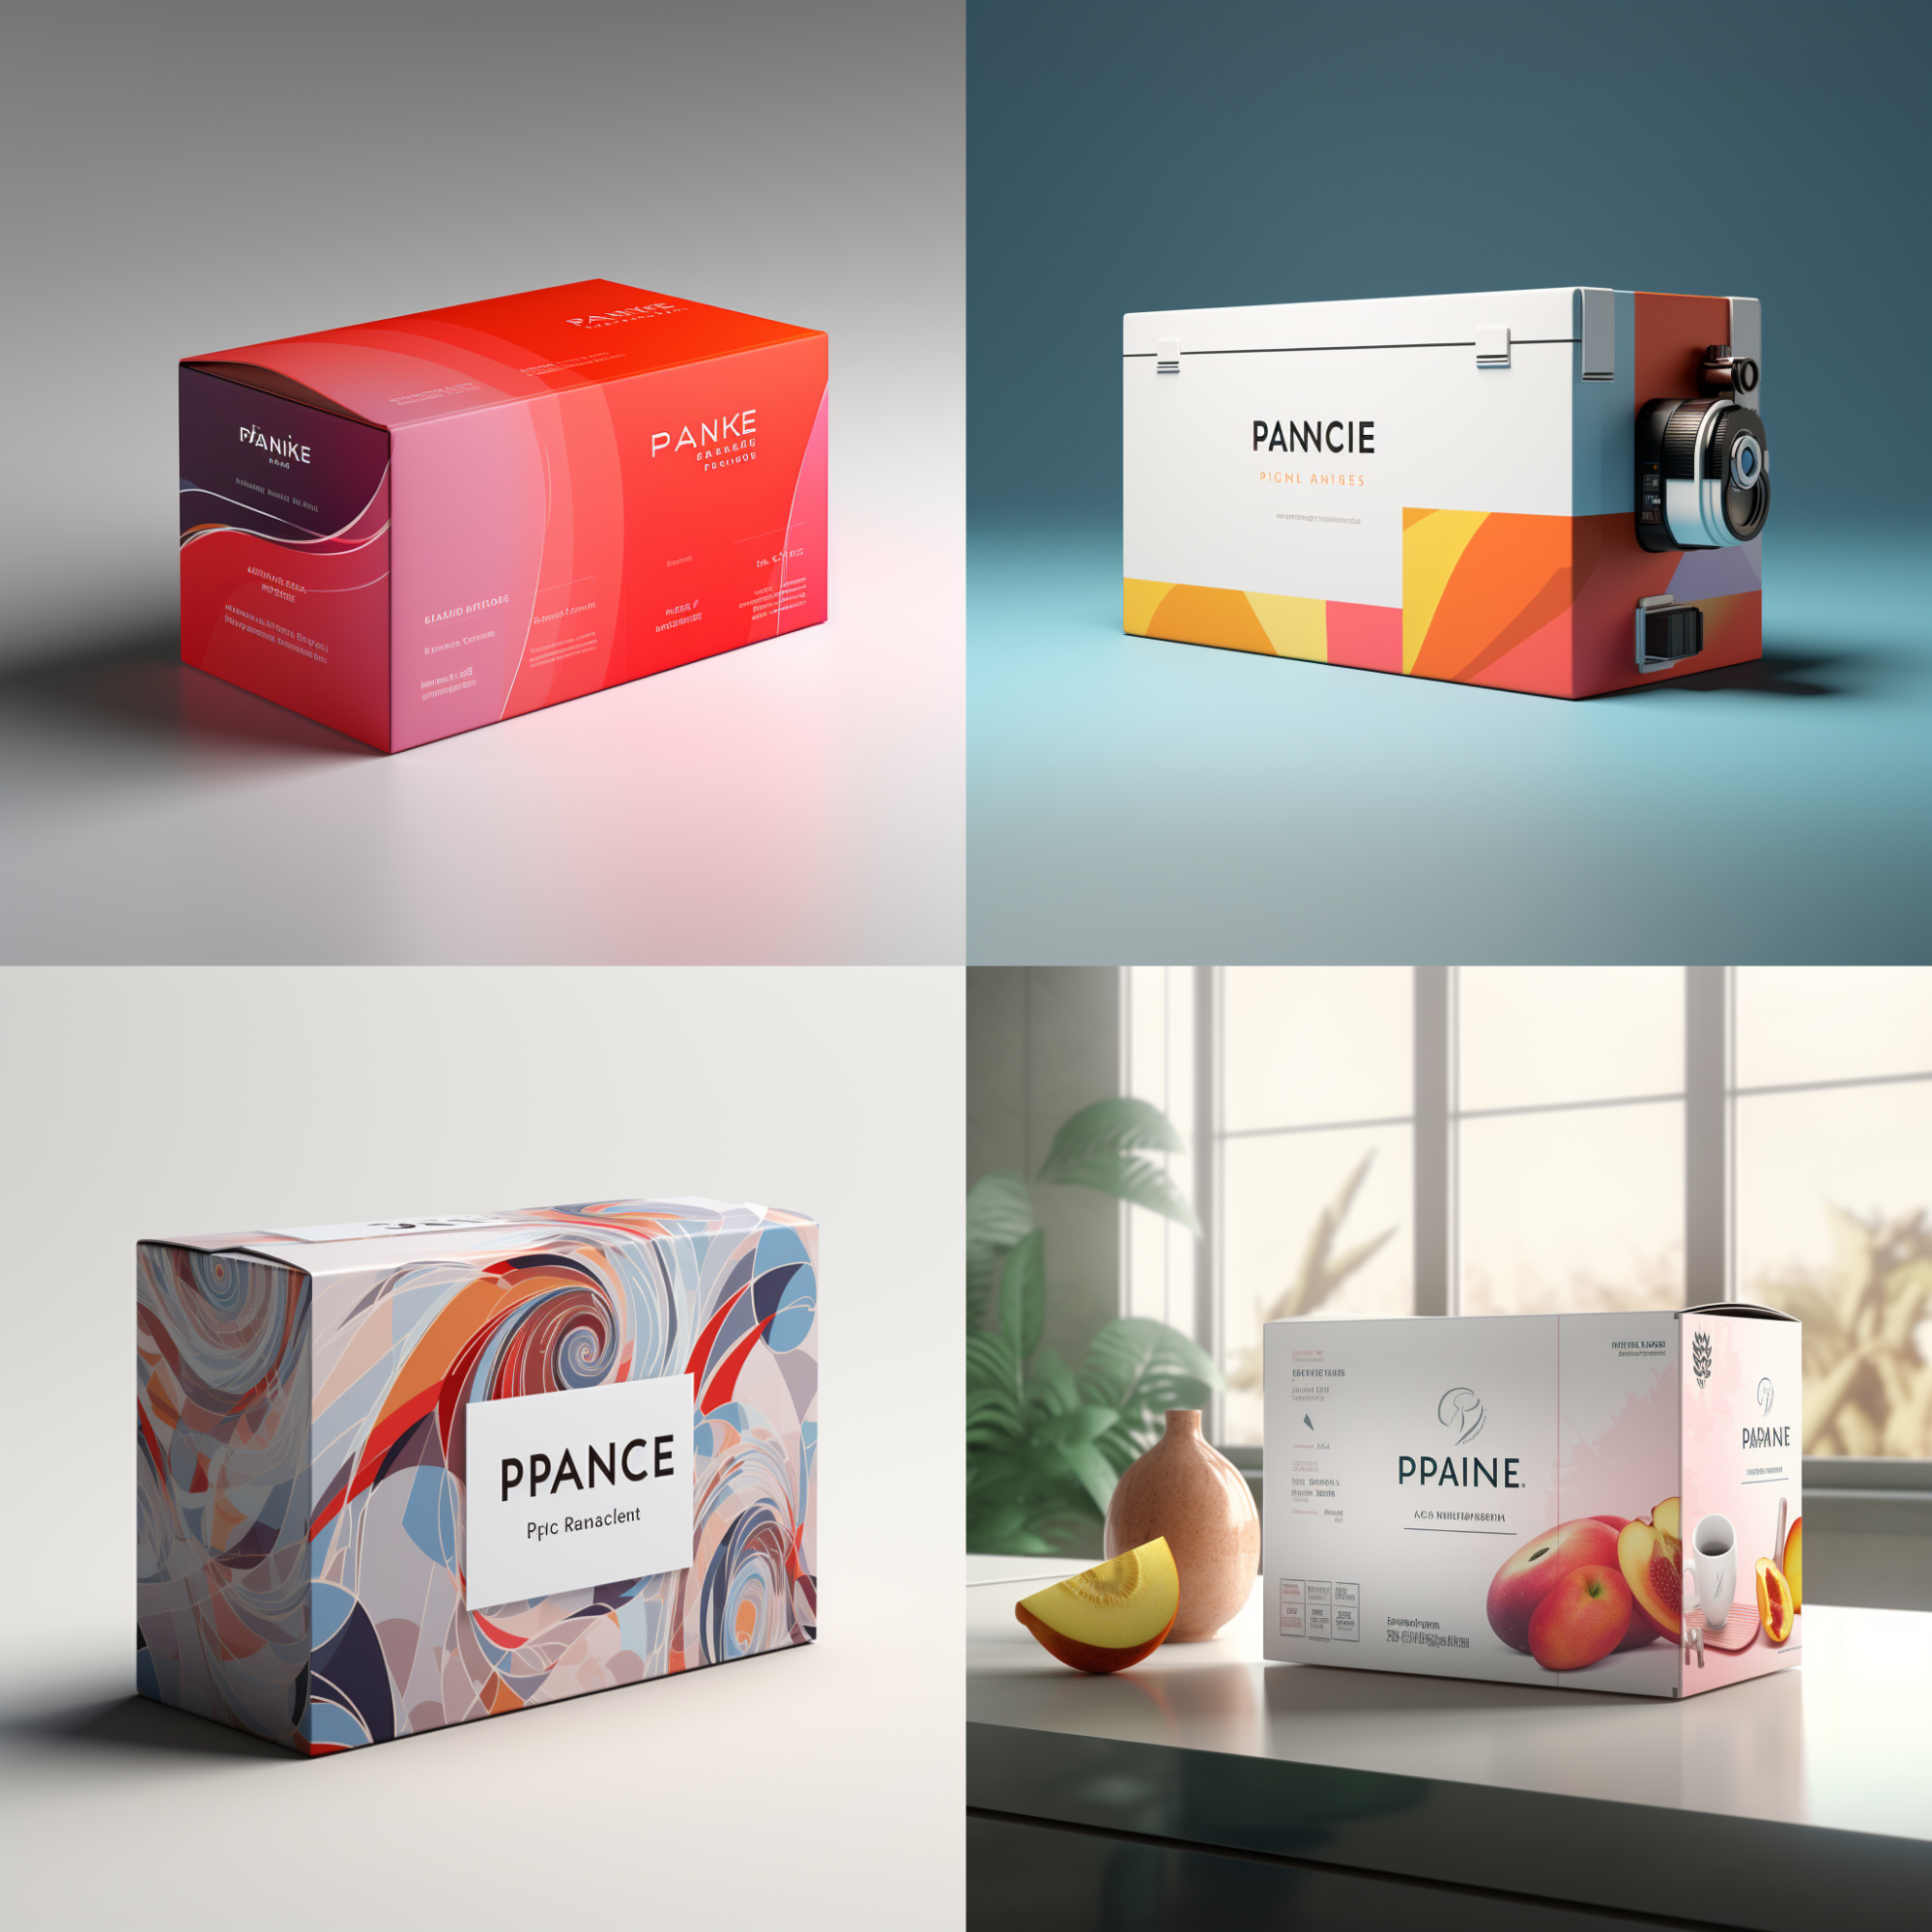 Four image options generated by Midjourney based on a packaging panache prompt